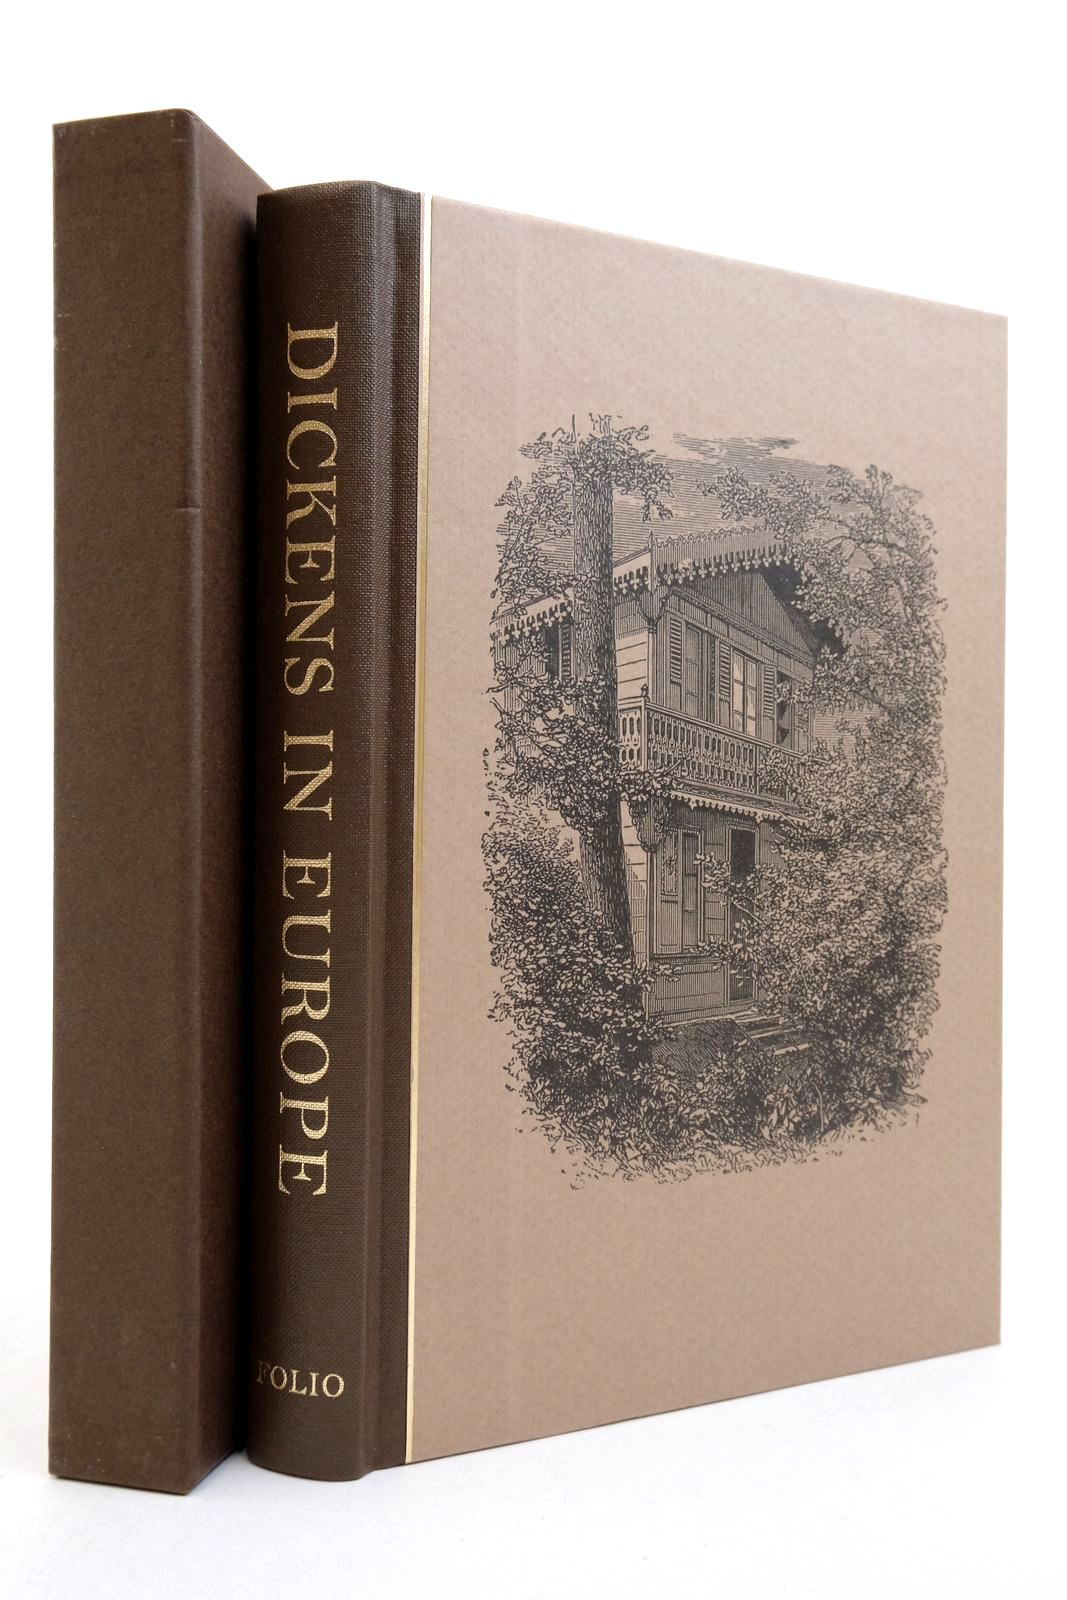 Photo of DICKENS IN EUROPE written by Dickens, Charles Vallance, Rosalind published by Folio Society (STOCK CODE: 2140233)  for sale by Stella & Rose's Books